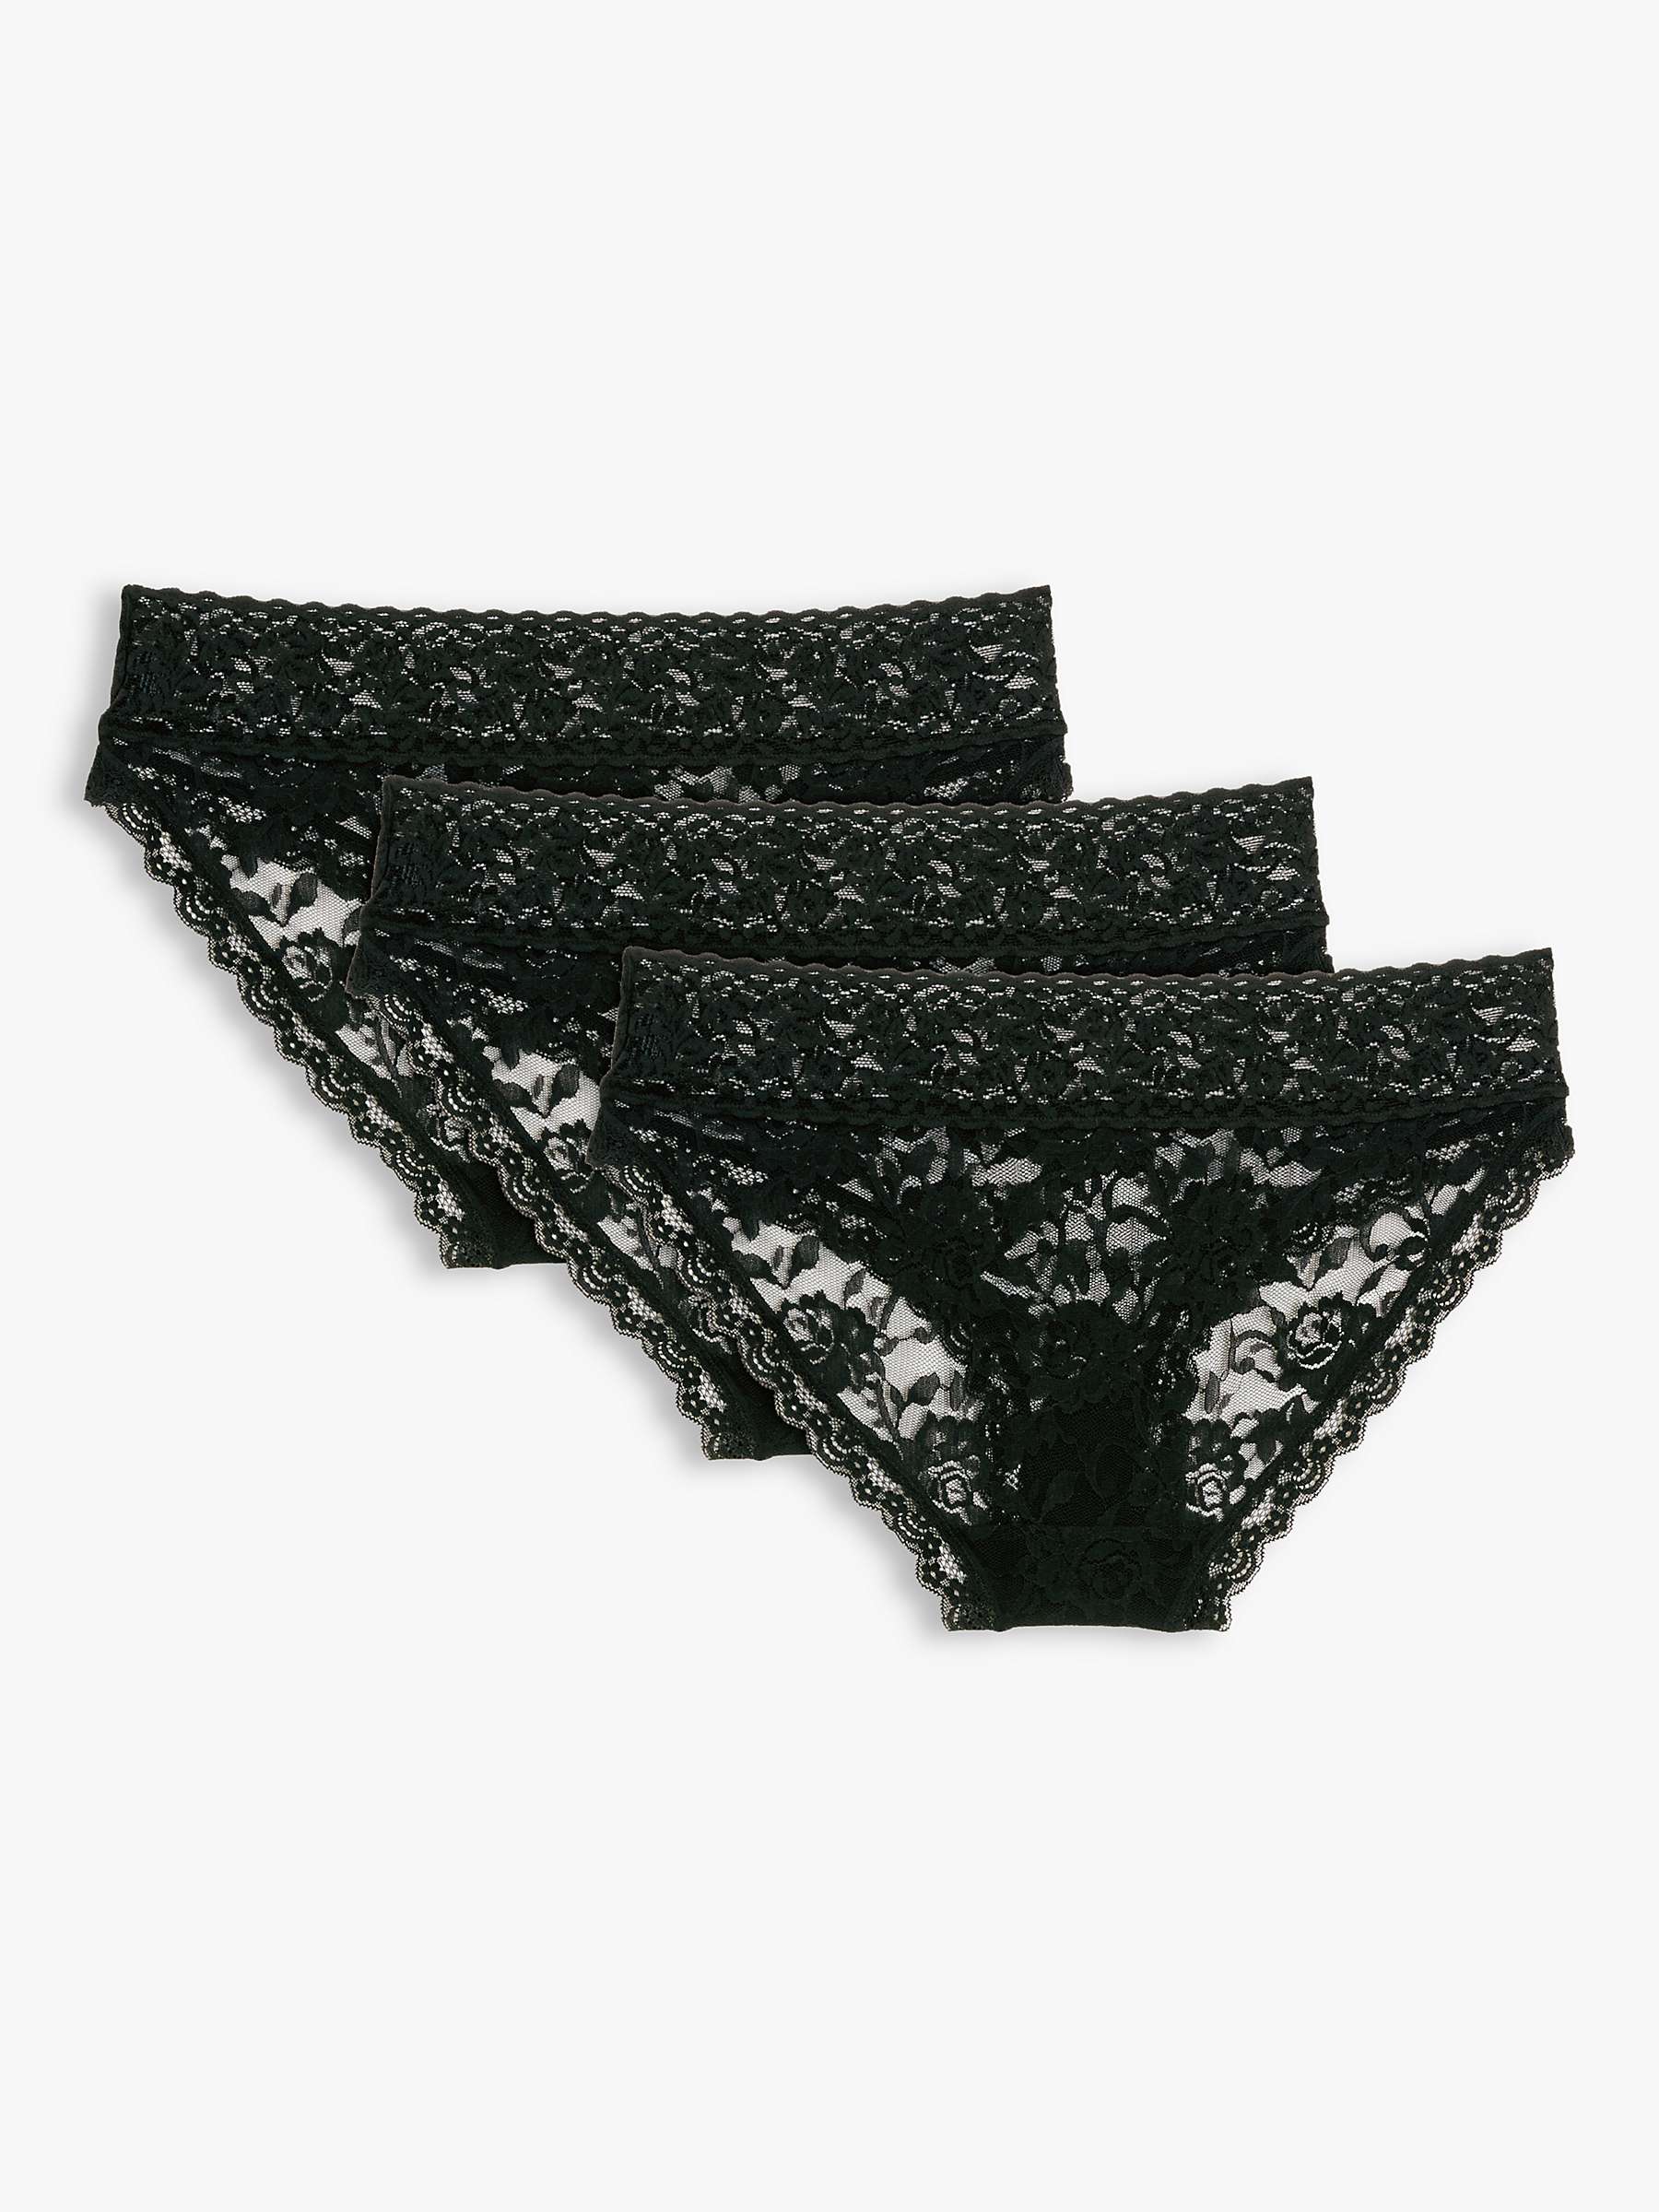 Buy John Lewis ANYDAY Helenca Lace Bikini Knickers, Pack of 3 Online at johnlewis.com